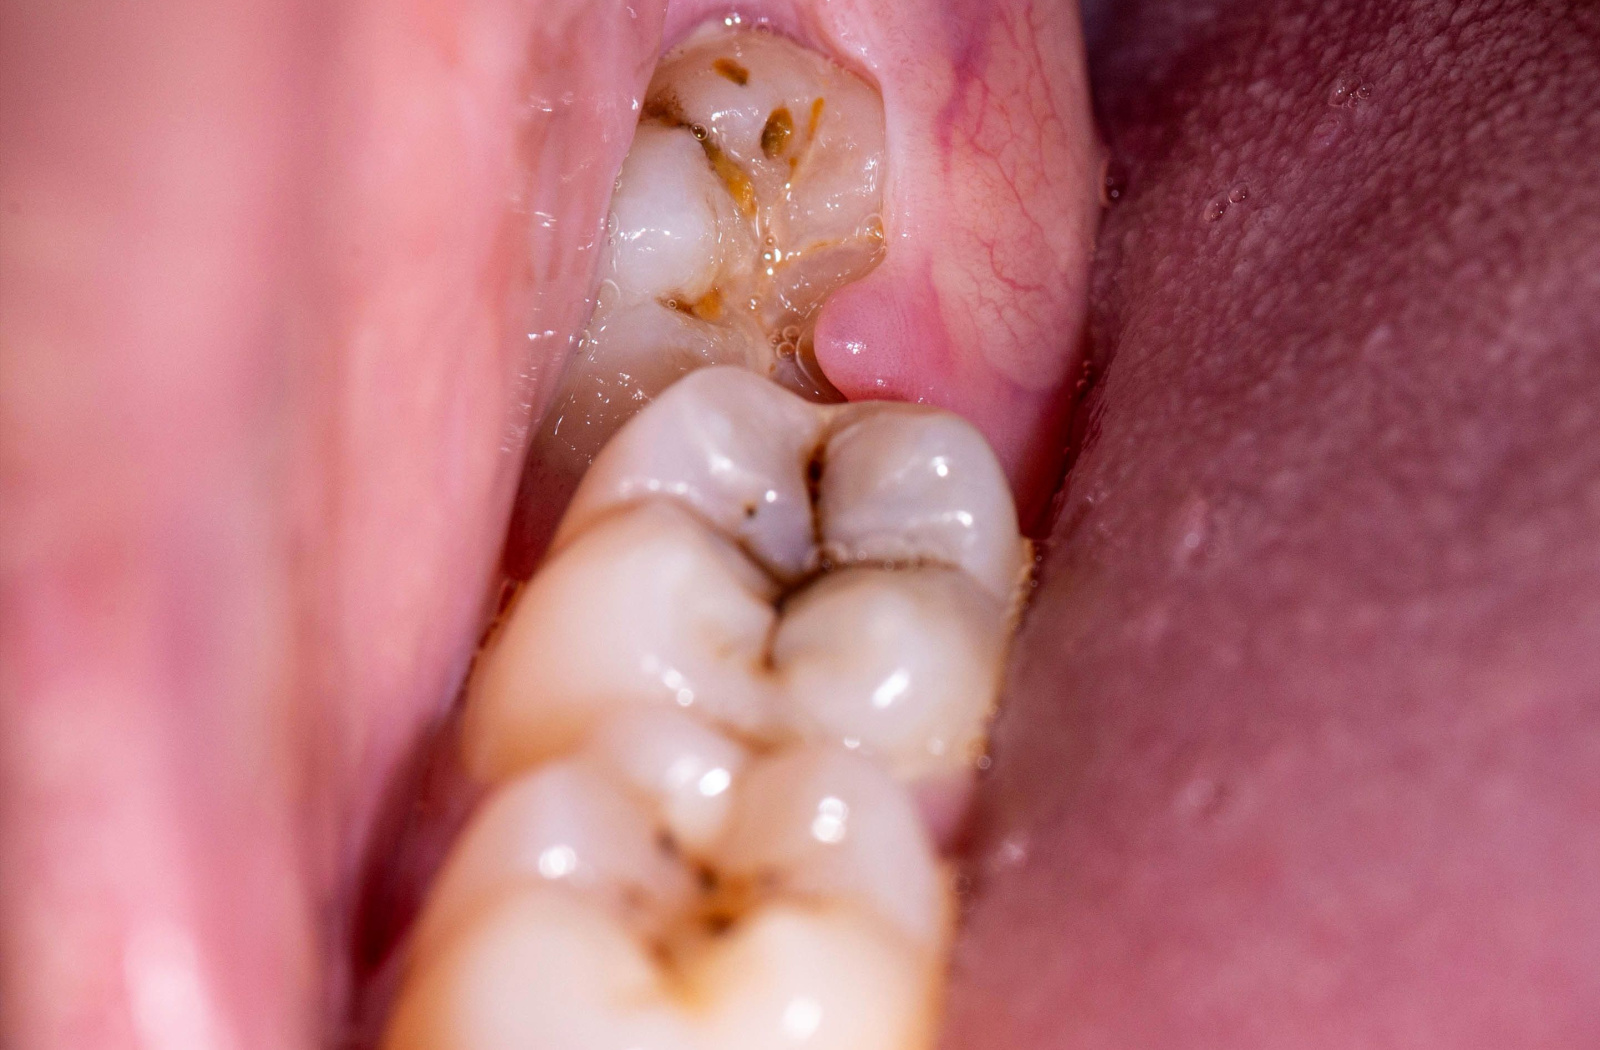 A close-up of an impacted wisdom tooth causing an abscess in the gums.
